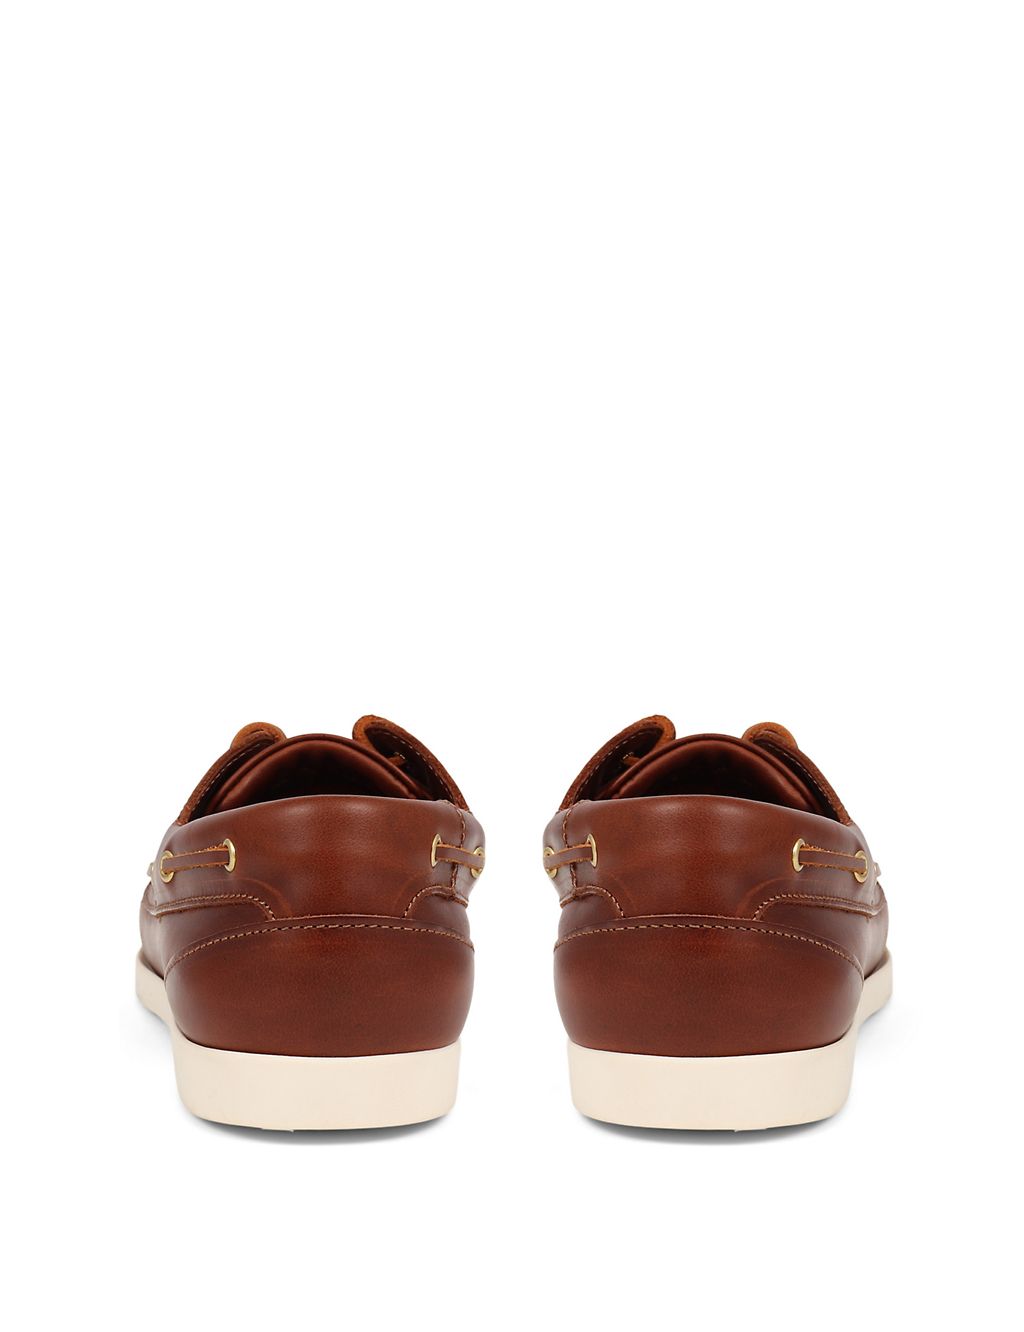 Leather Boat Shoes 7 of 7